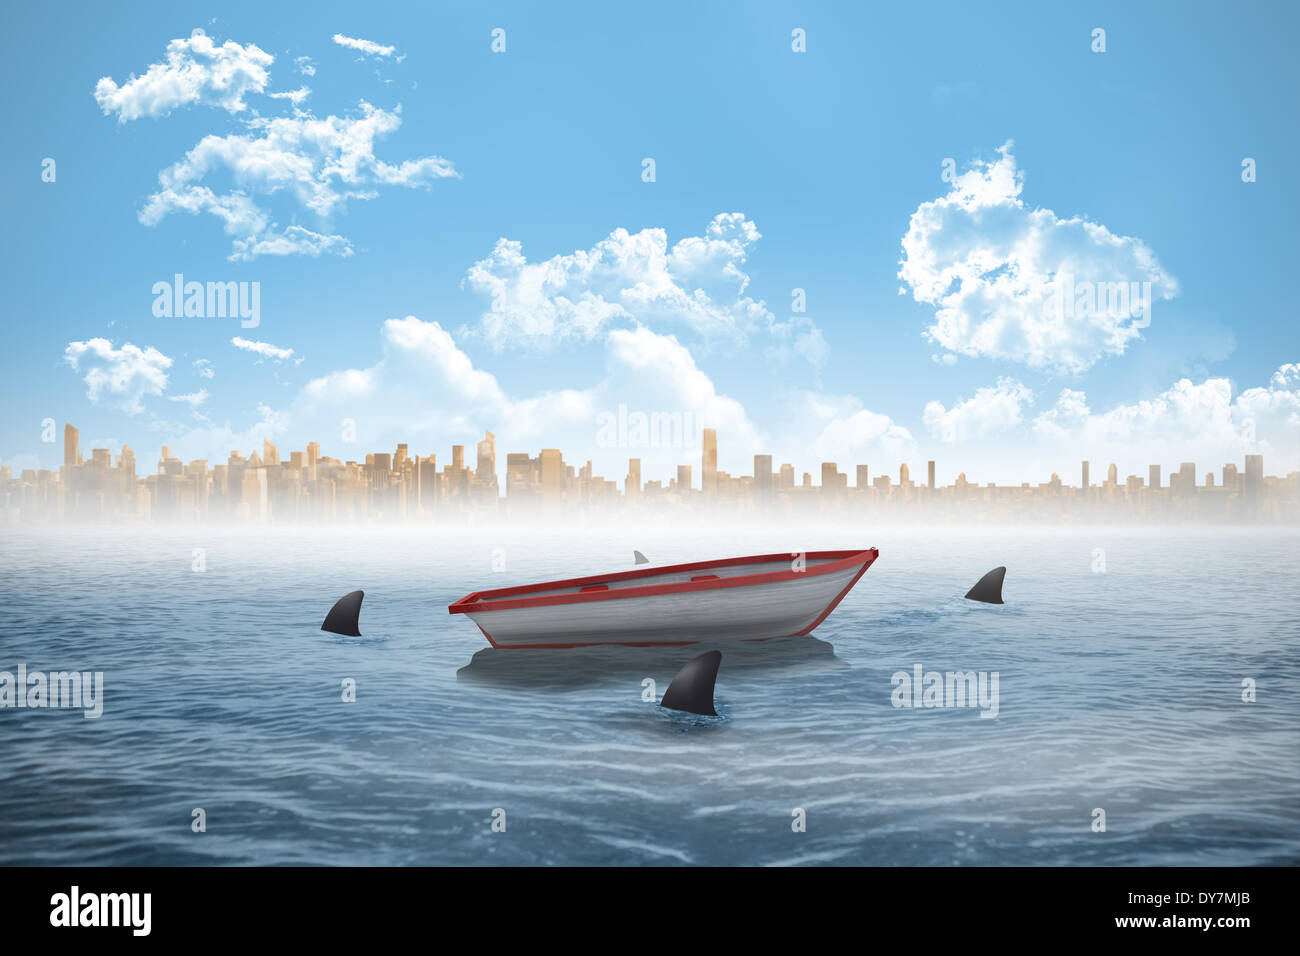 Sharks circling a small boat in the sea Stock Photo